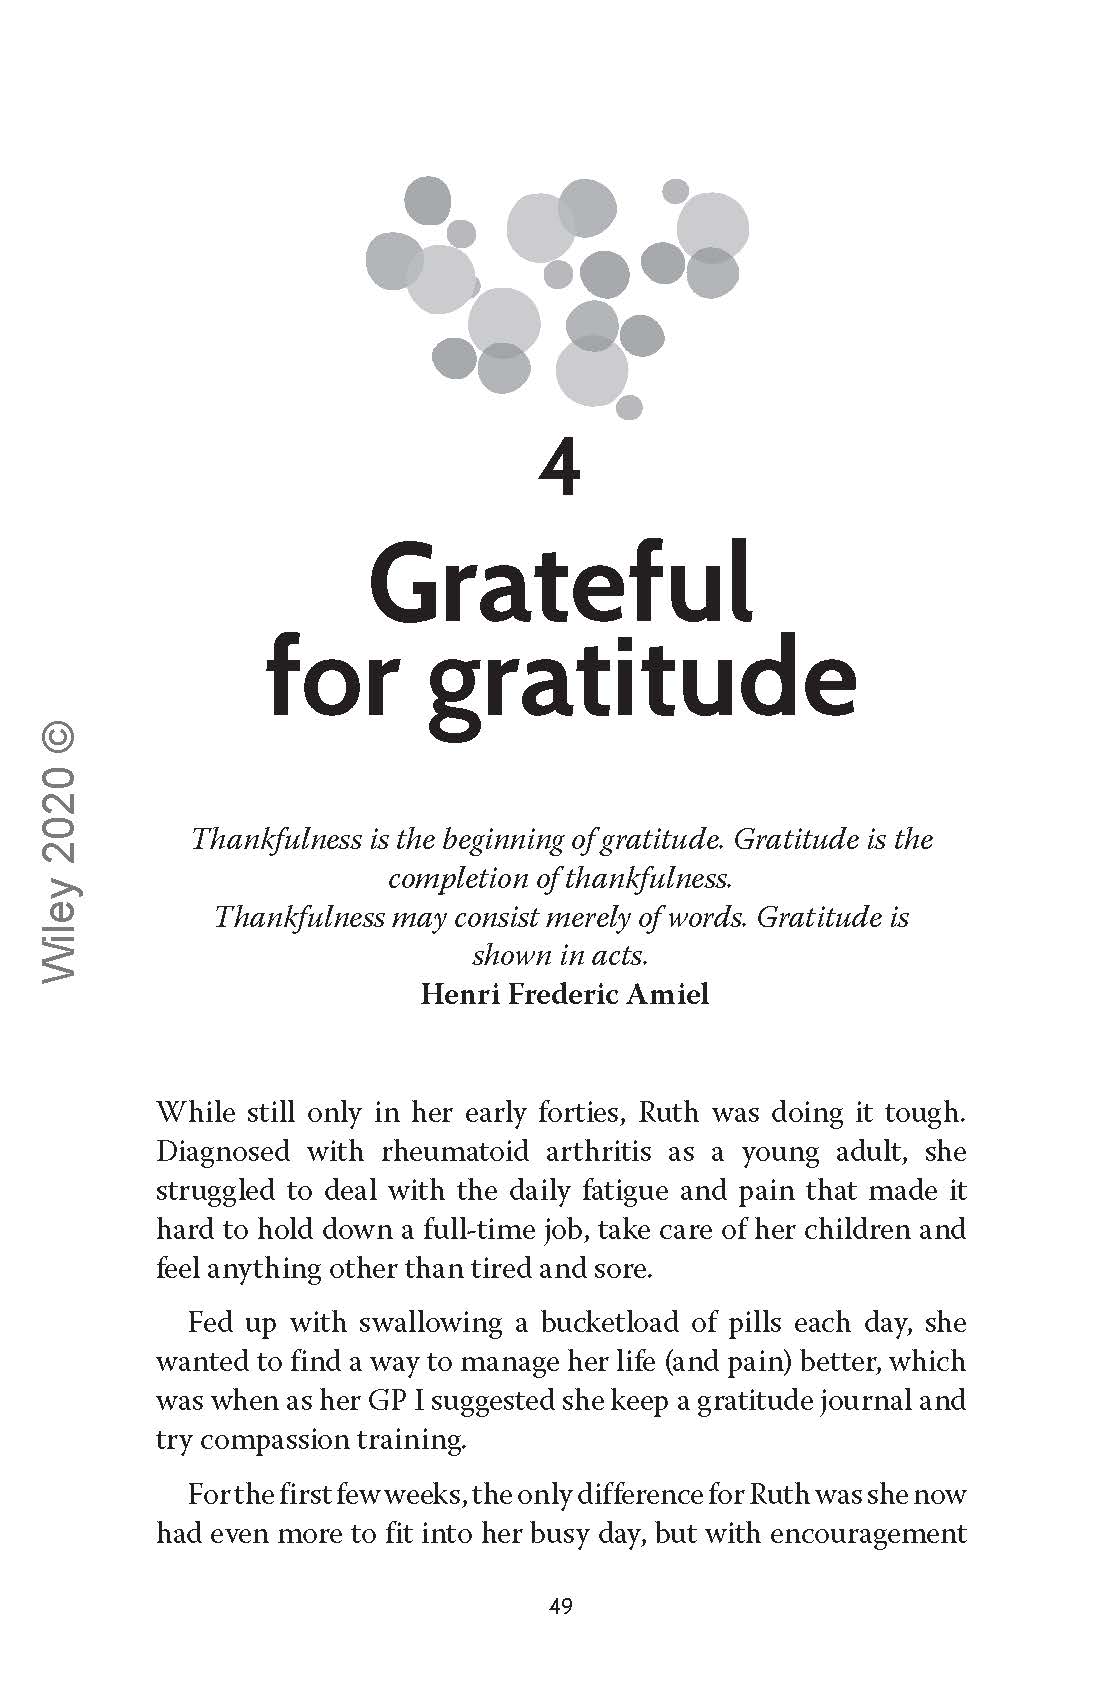 Gratitude for Mental Wellbeing